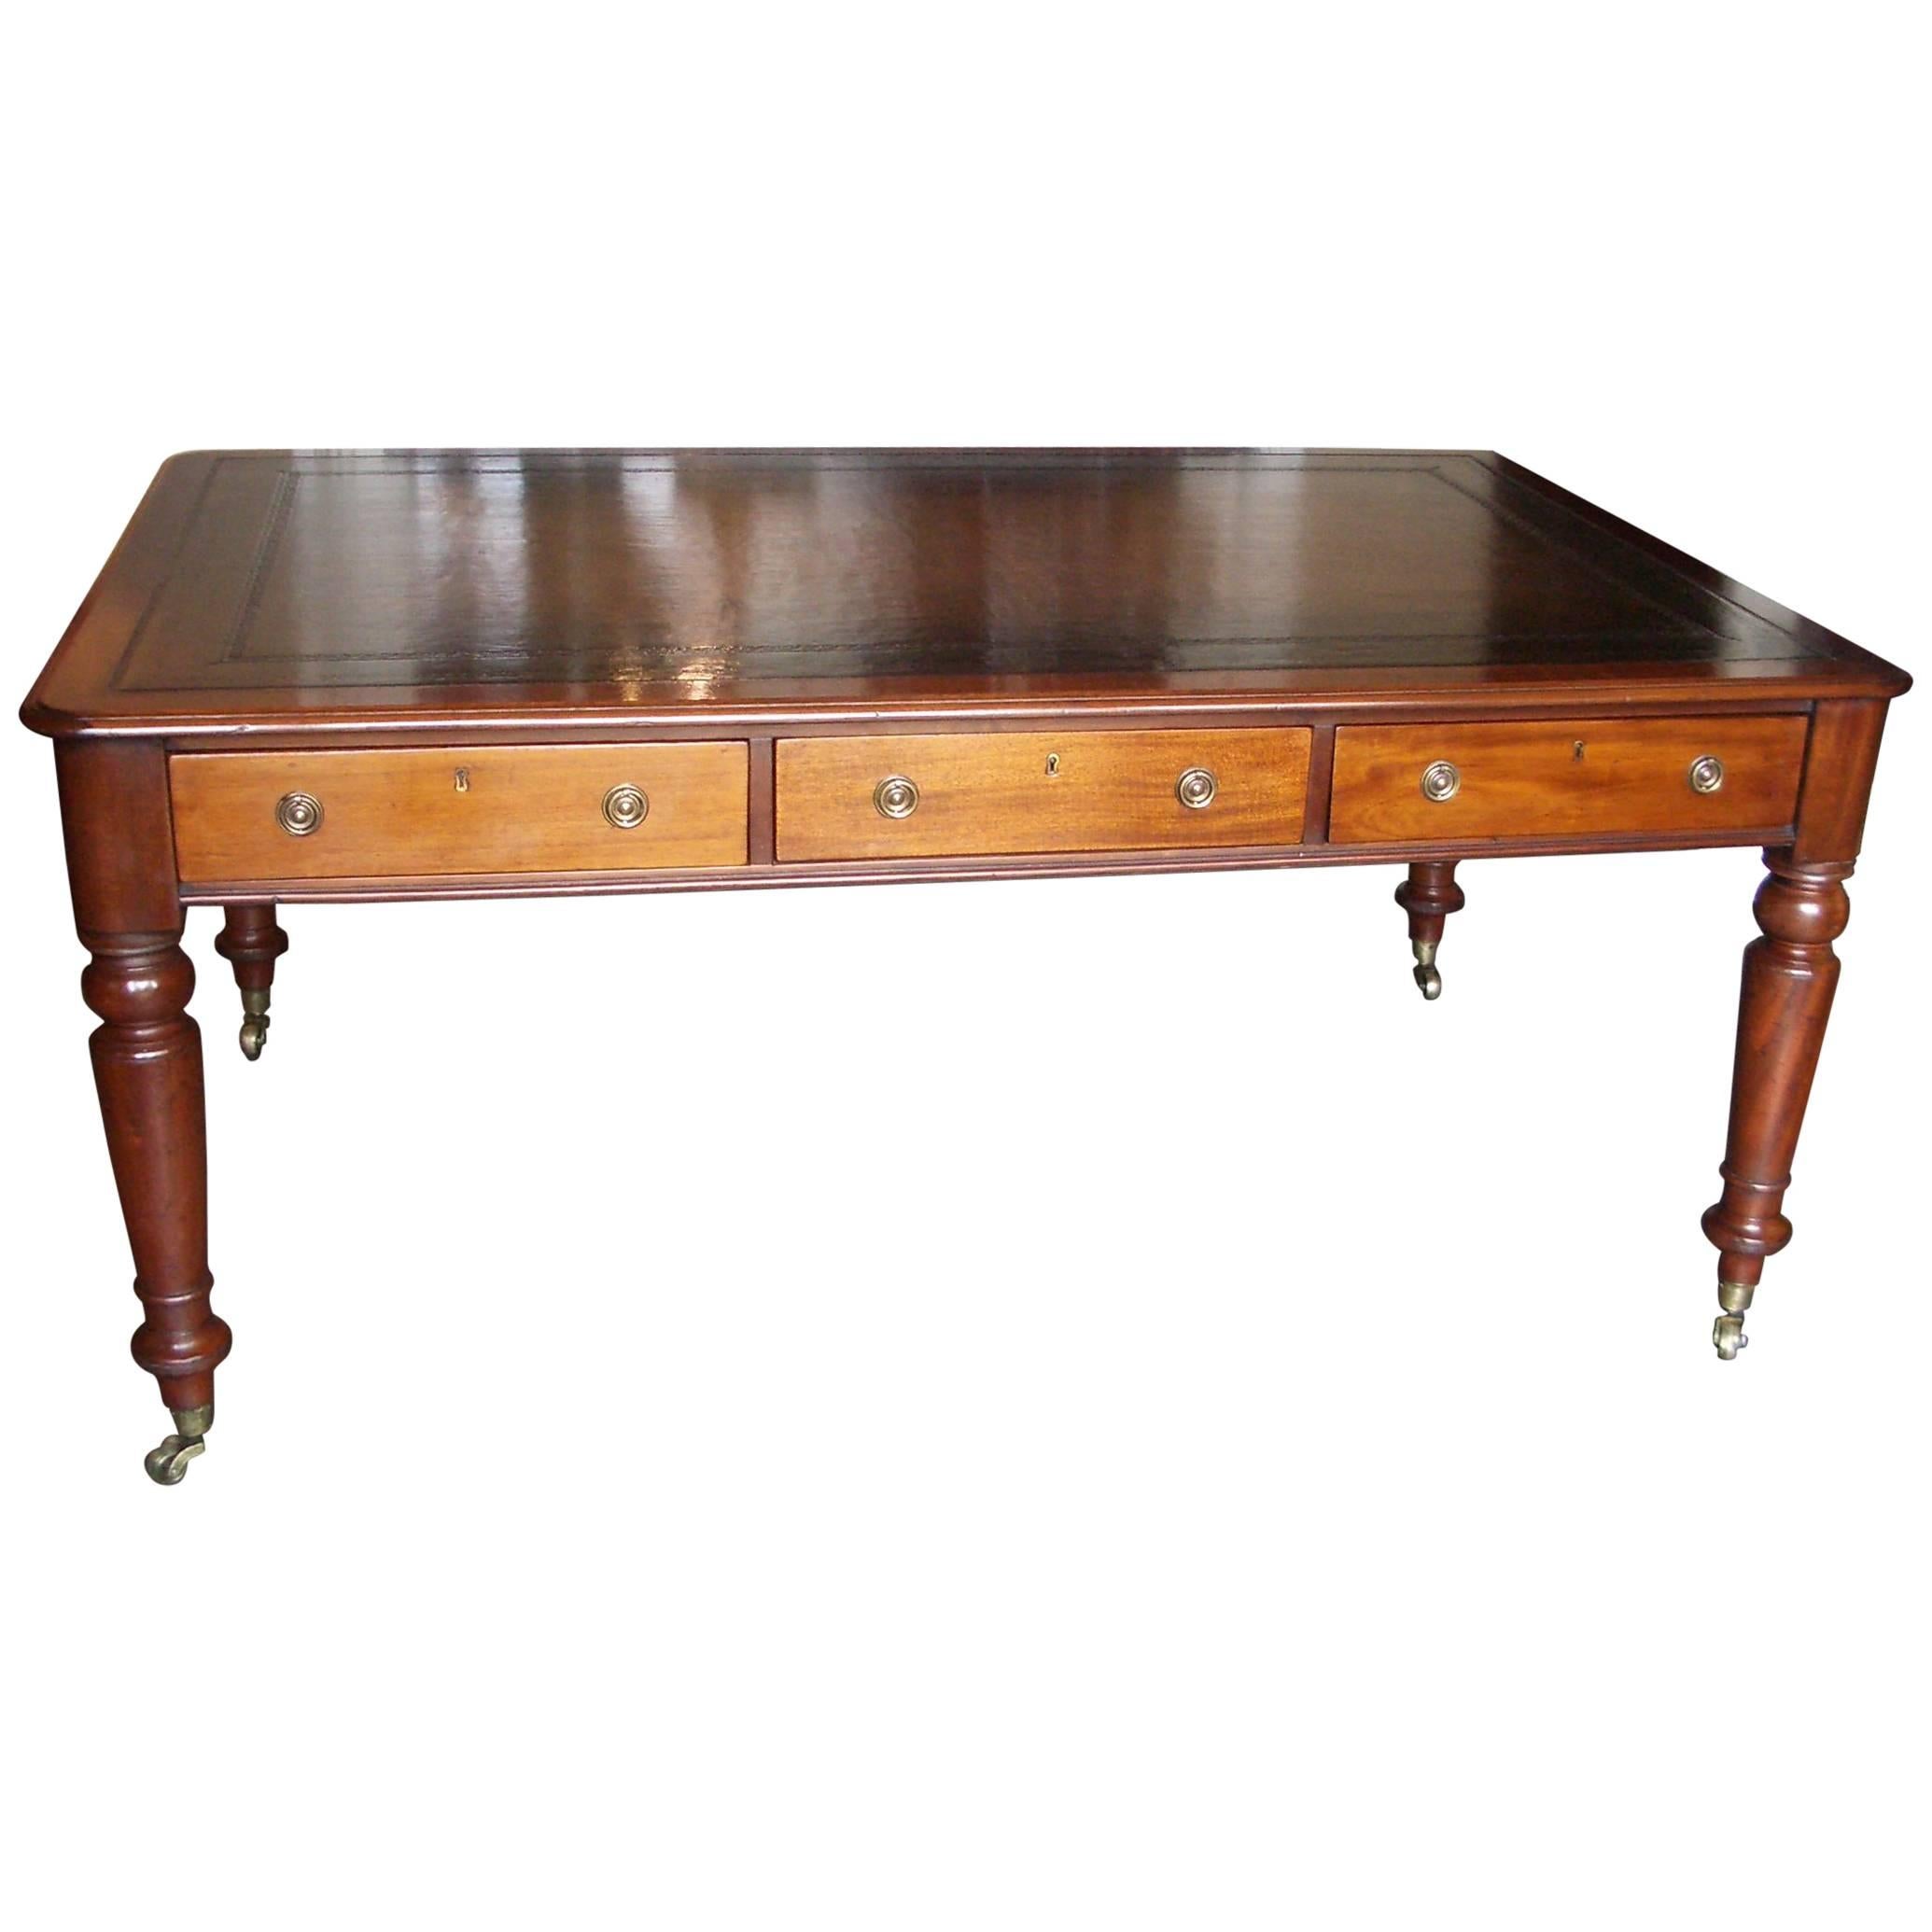 19th Century Mahogany Writing Table with Six Drawers